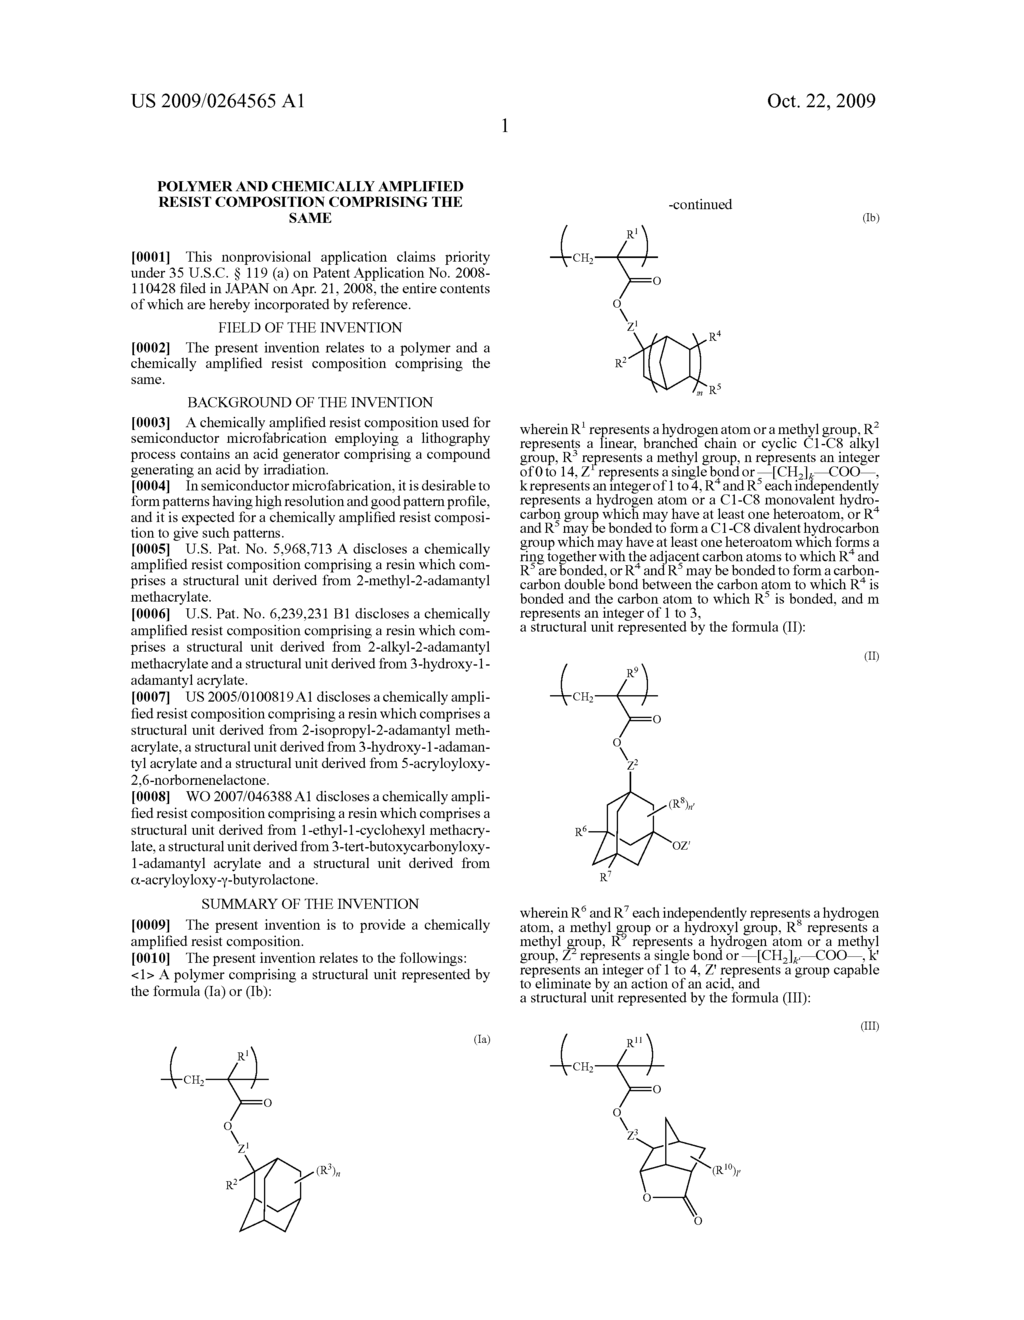 POLYMER AND CHEMICALLY AMPLIFIED RESIST COMPOSITION COMPRISING THE SAME - diagram, schematic, and image 02